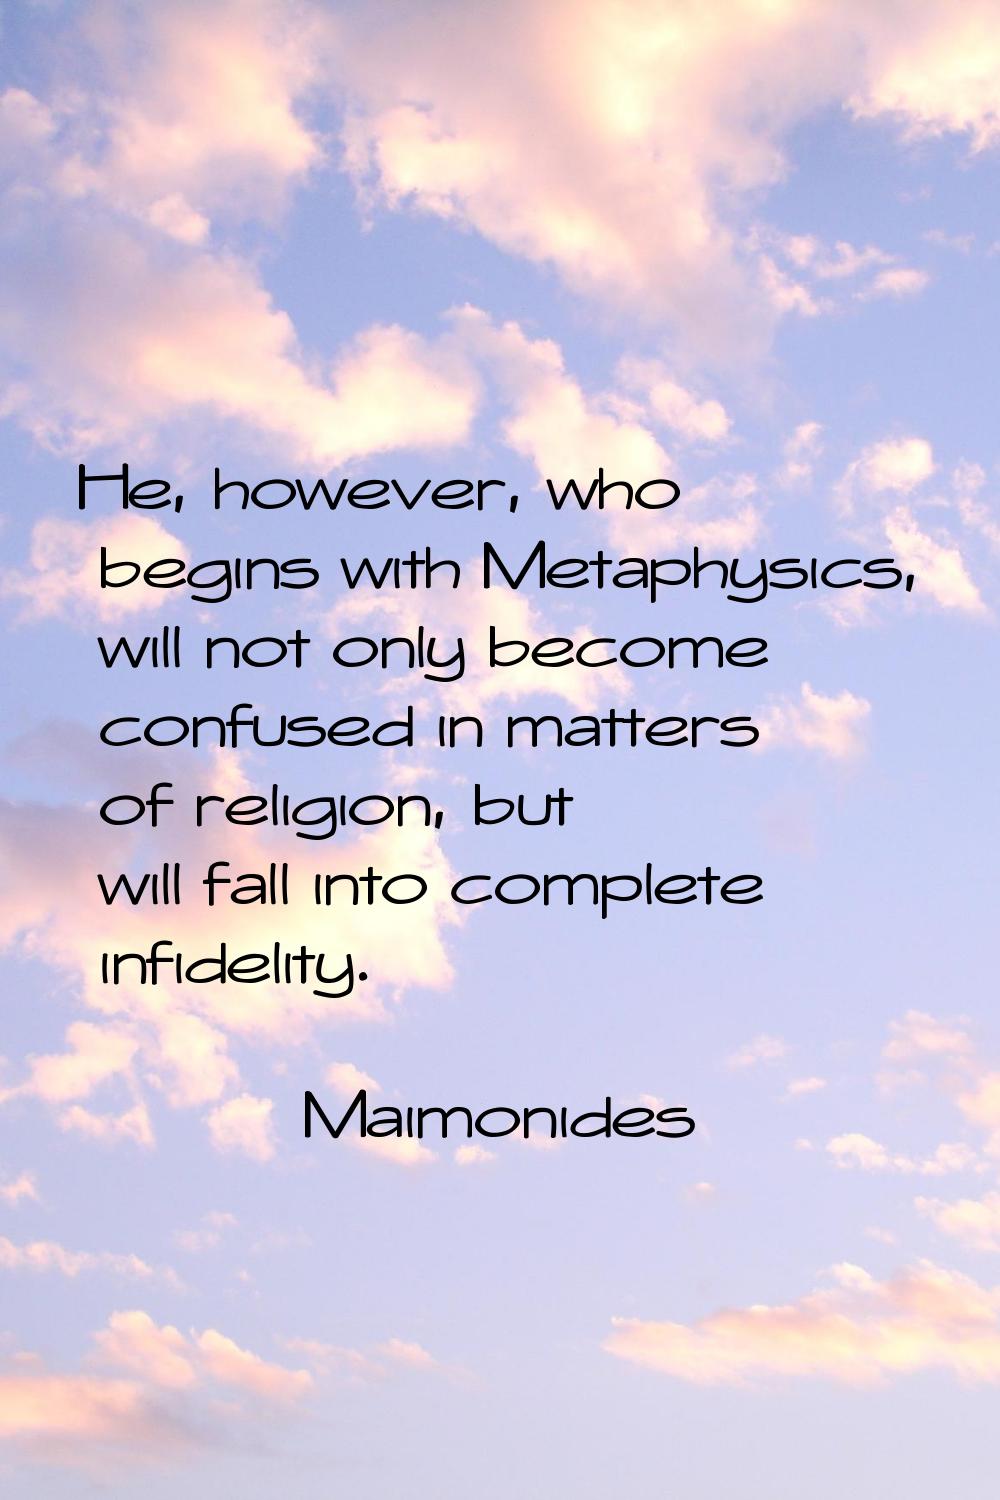 He, however, who begins with Metaphysics, will not only become confused in matters of religion, but